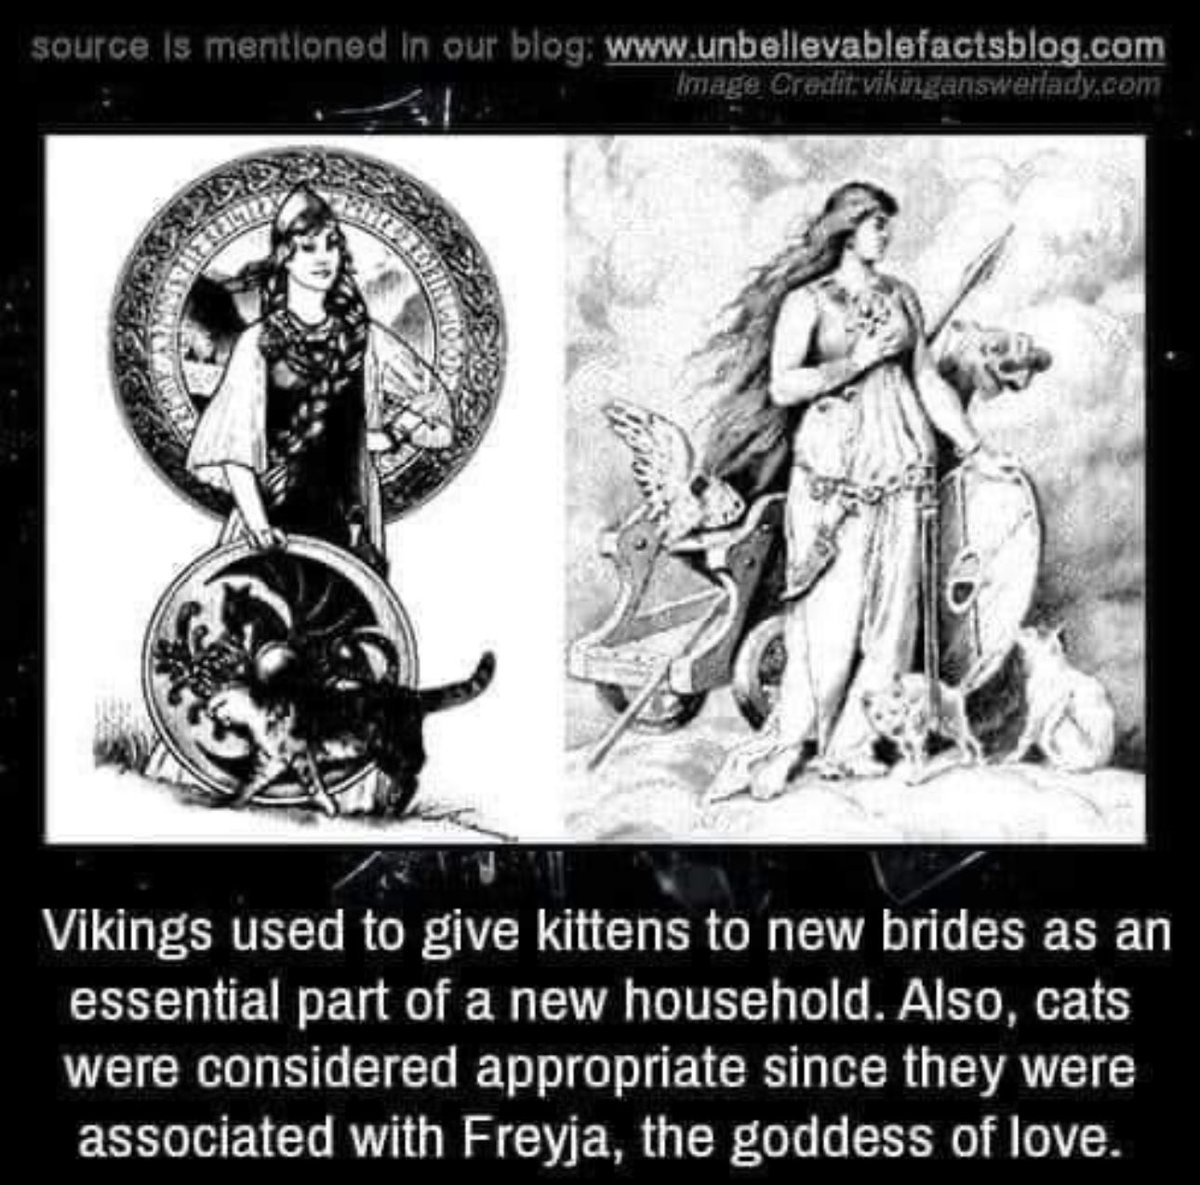 Viking truly new the way to a woman’s heart 😻😹